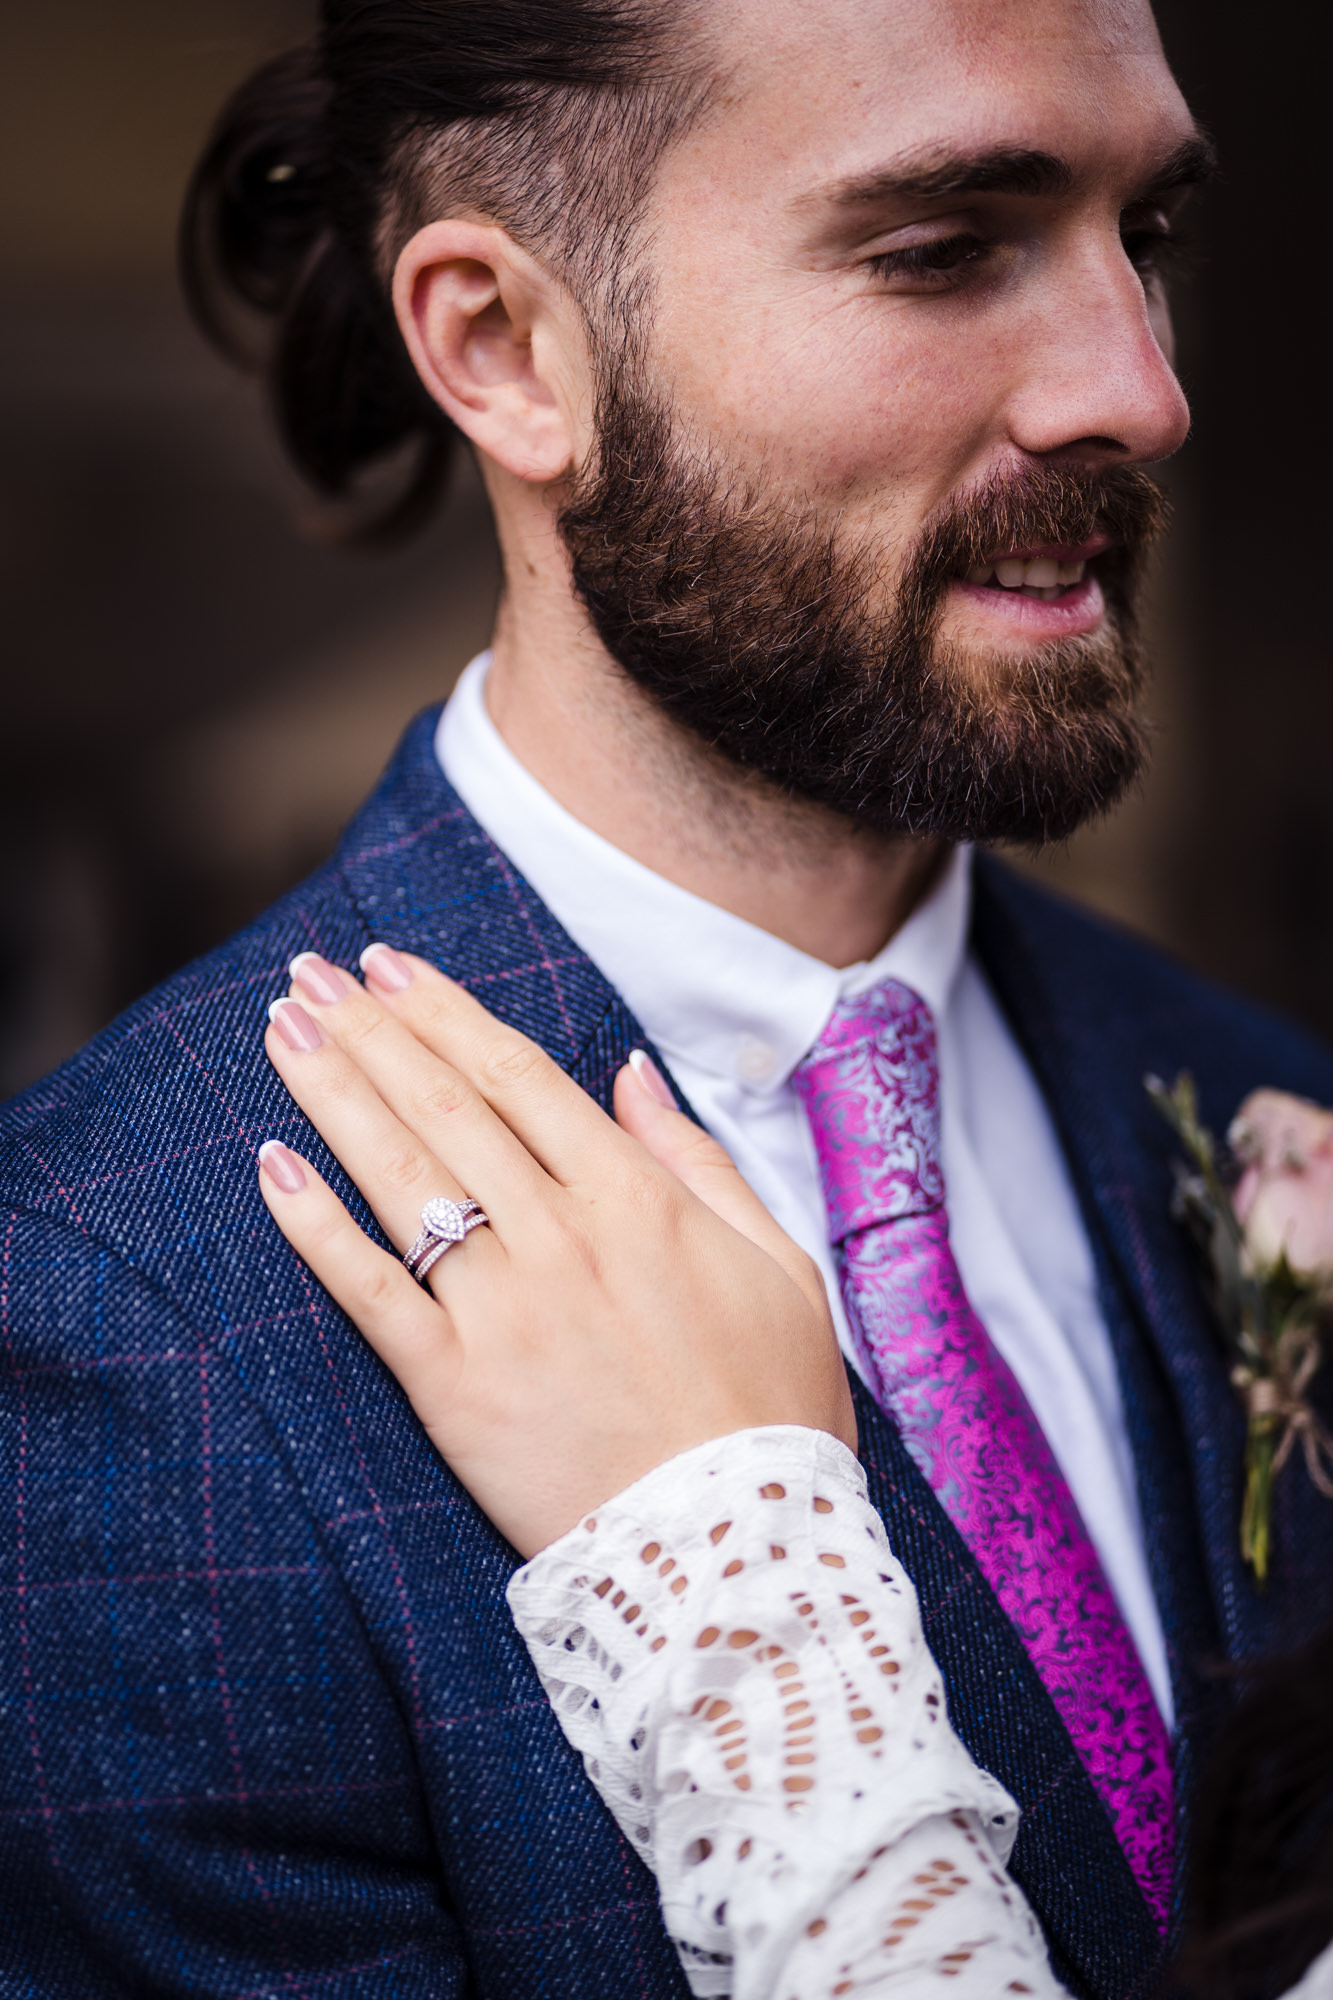 close up photo of brides hand resting on grooms shoulder showing off engagement and wedding ring